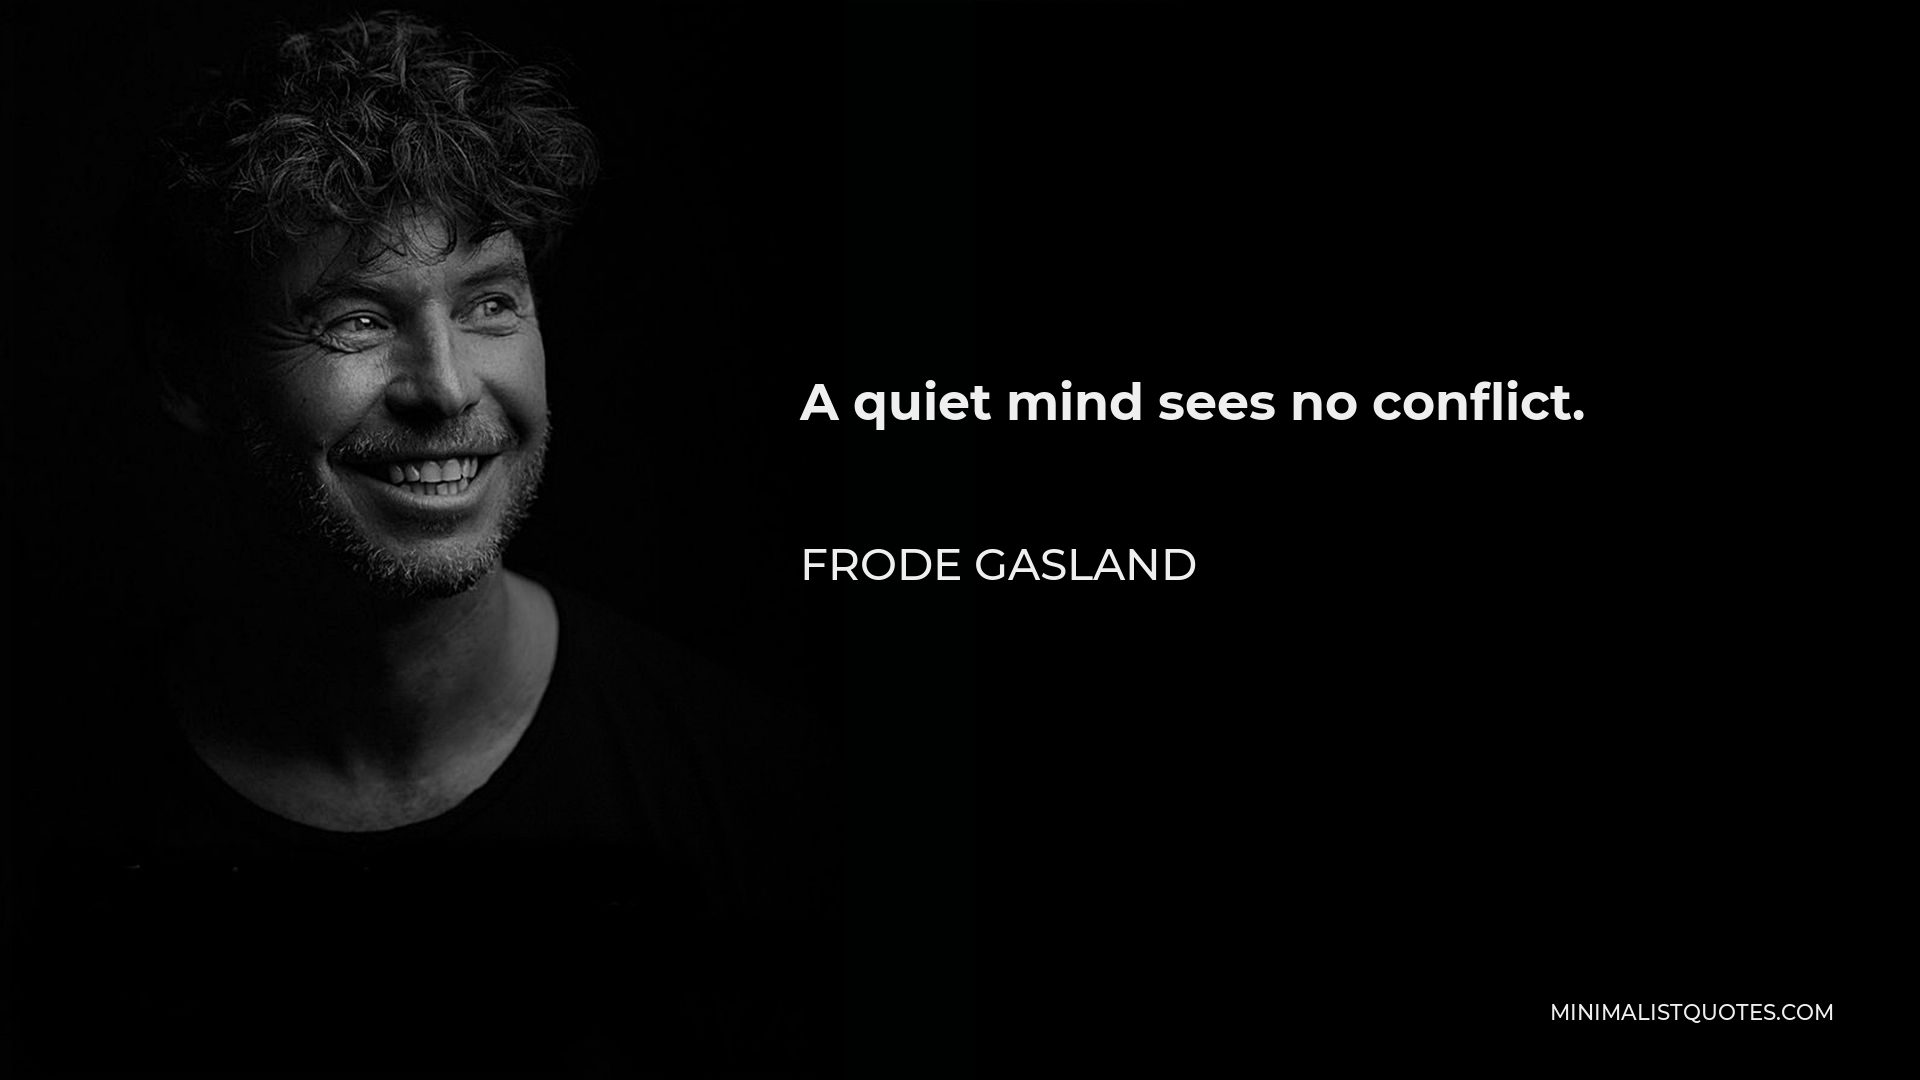 Frode Gasland Quote - A quiet mind sees no conflict.